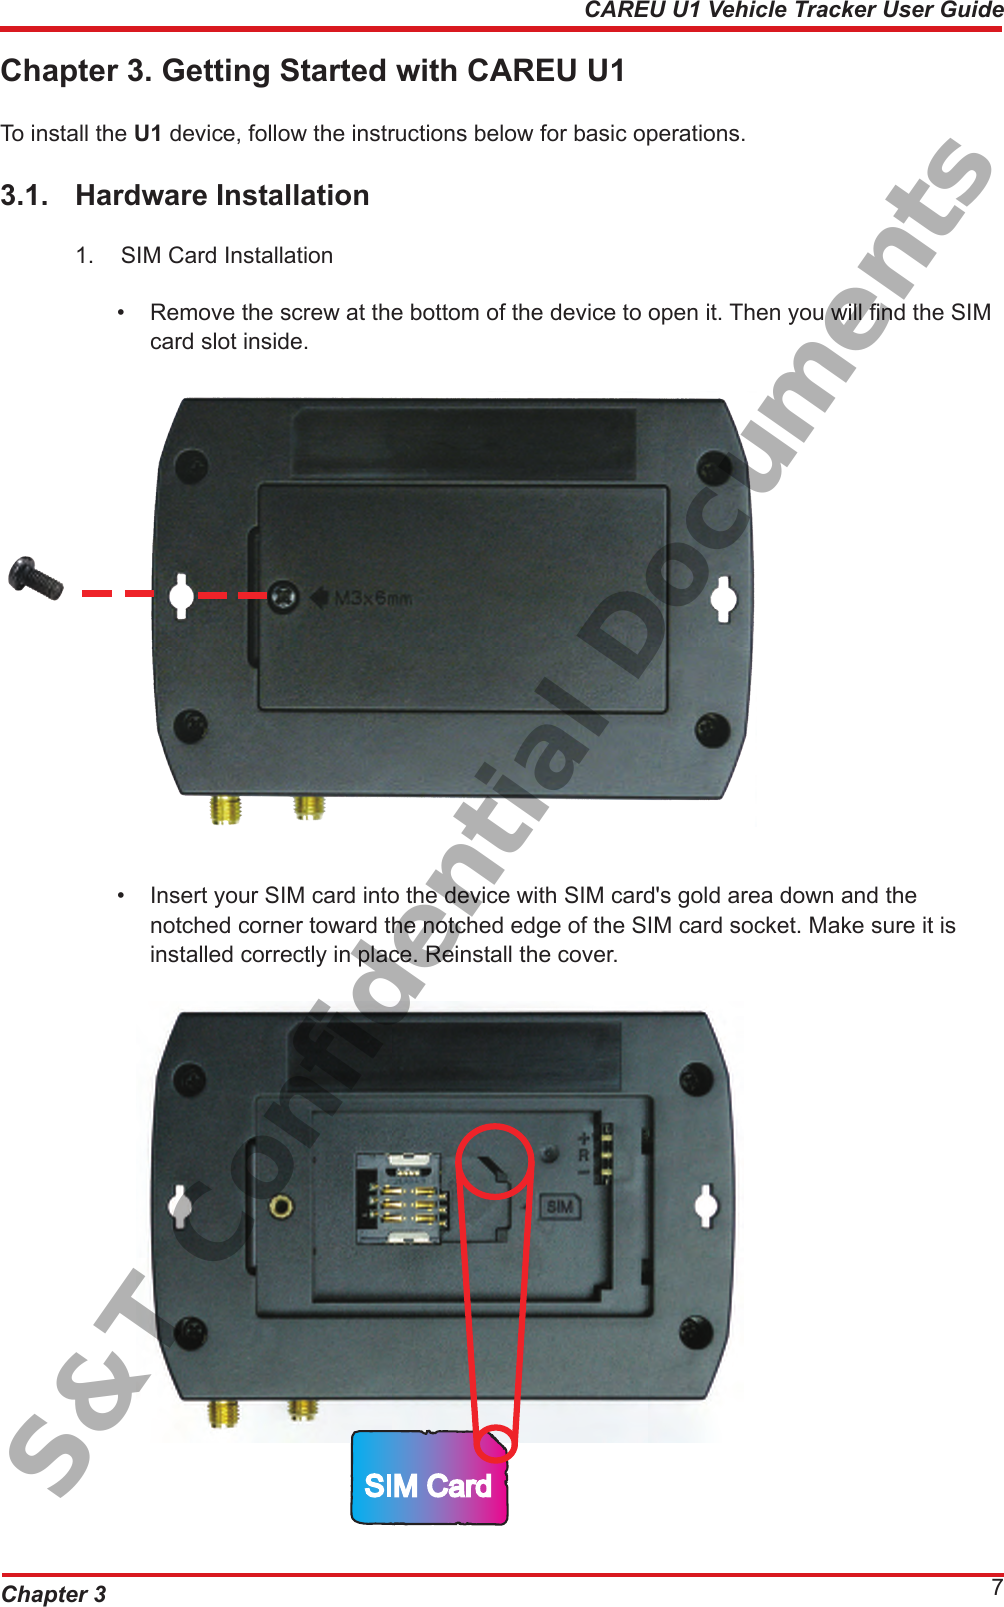 Chapter 3 7CAREU U1 Vehicle Tracker User GuideChapter 3. Getting Started with CAREU U1To install the U1 device, follow the instructions below for basic operations.3.1.  Hardware Installation1.  SIM Card Installation •  Remove the screw at the bottom of the device to open it. Then you will nd the SIM      card slot inside.•  Insert your SIM card into the device with SIM card&apos;s gold area down and the        notched corner toward the notched edge of the SIM card socket. Make sure it is        installed correctly in place. Reinstall the cover.SIM CardS&amp;T Confidential Documents